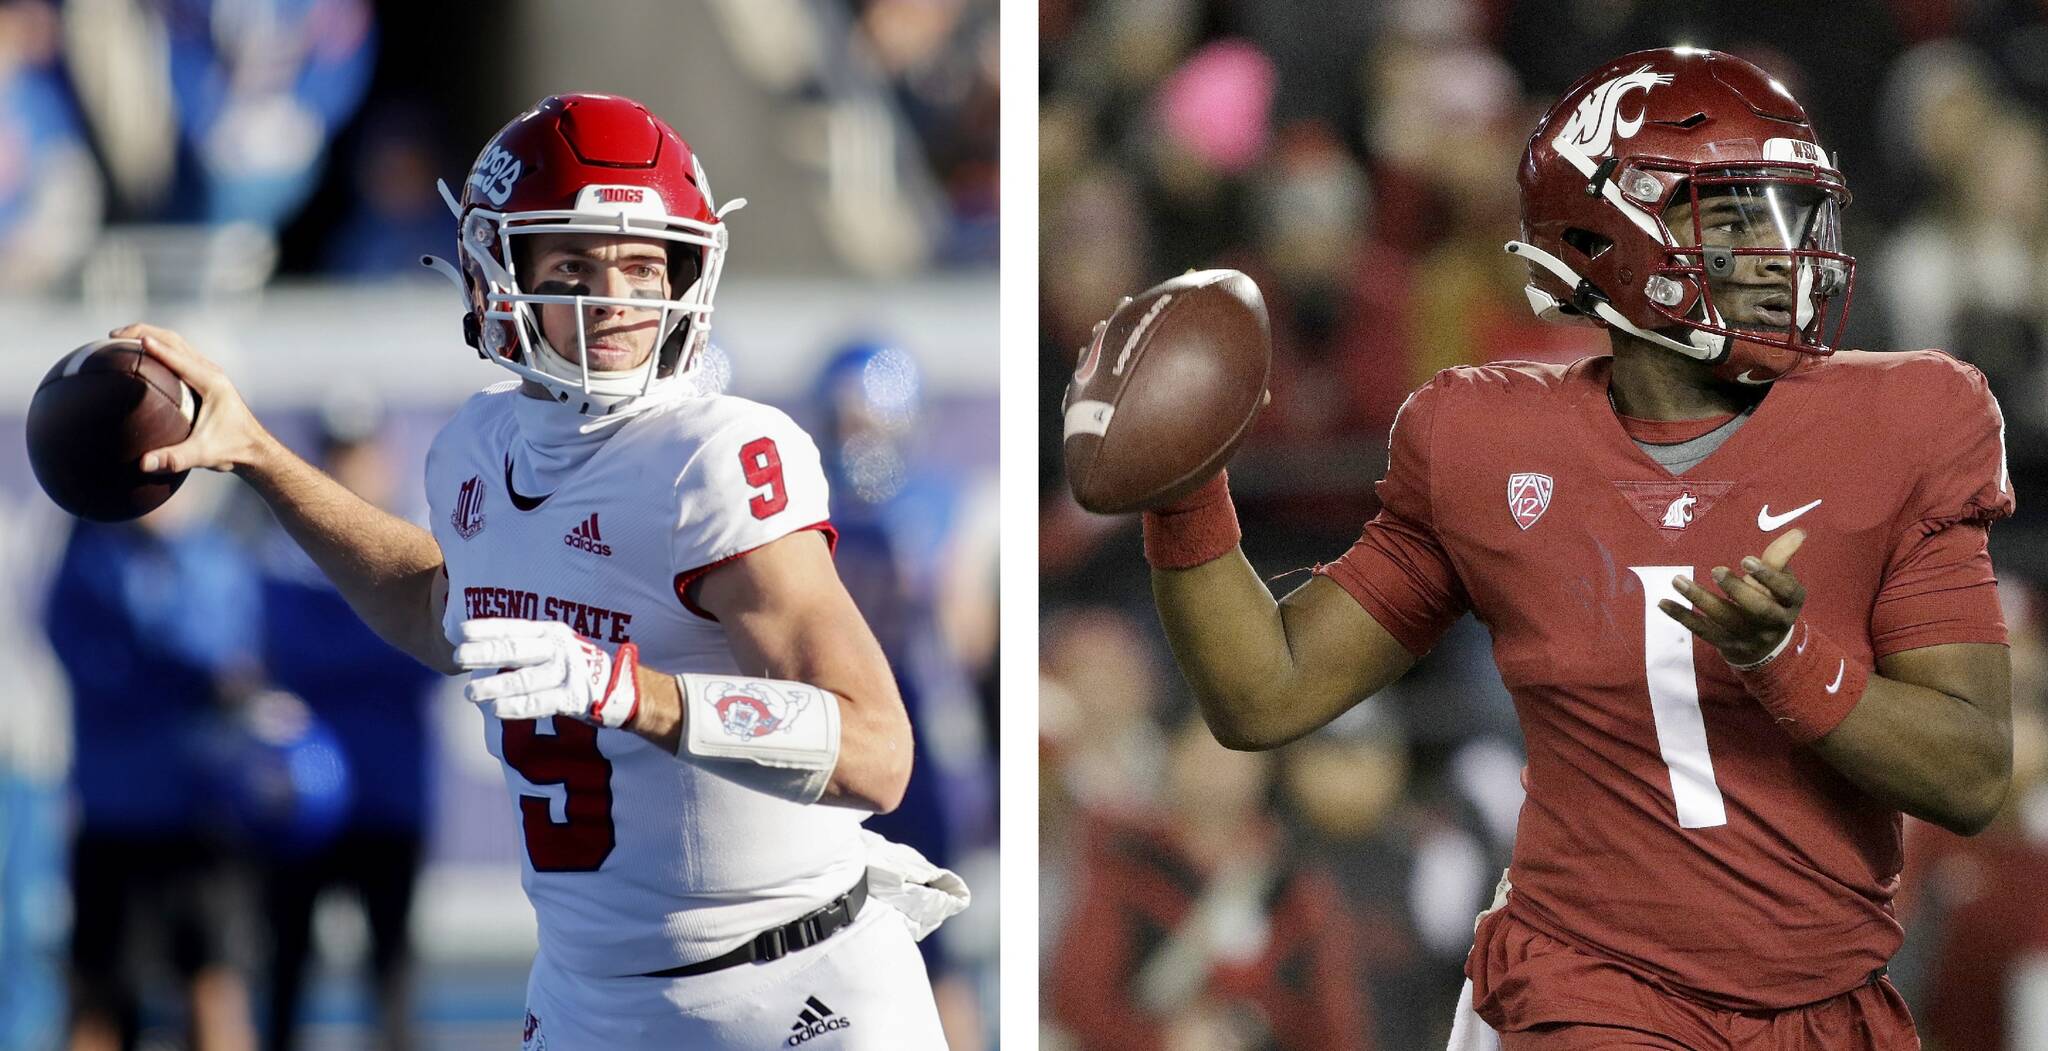 At left, Fresno State quarterback Jake Haener, a former Husky, will face off against Washington State quarterback Cam Ward in the Jimmy Kimmel Bowl on Dec. 17 in Los Angeles. (The Associated Press)